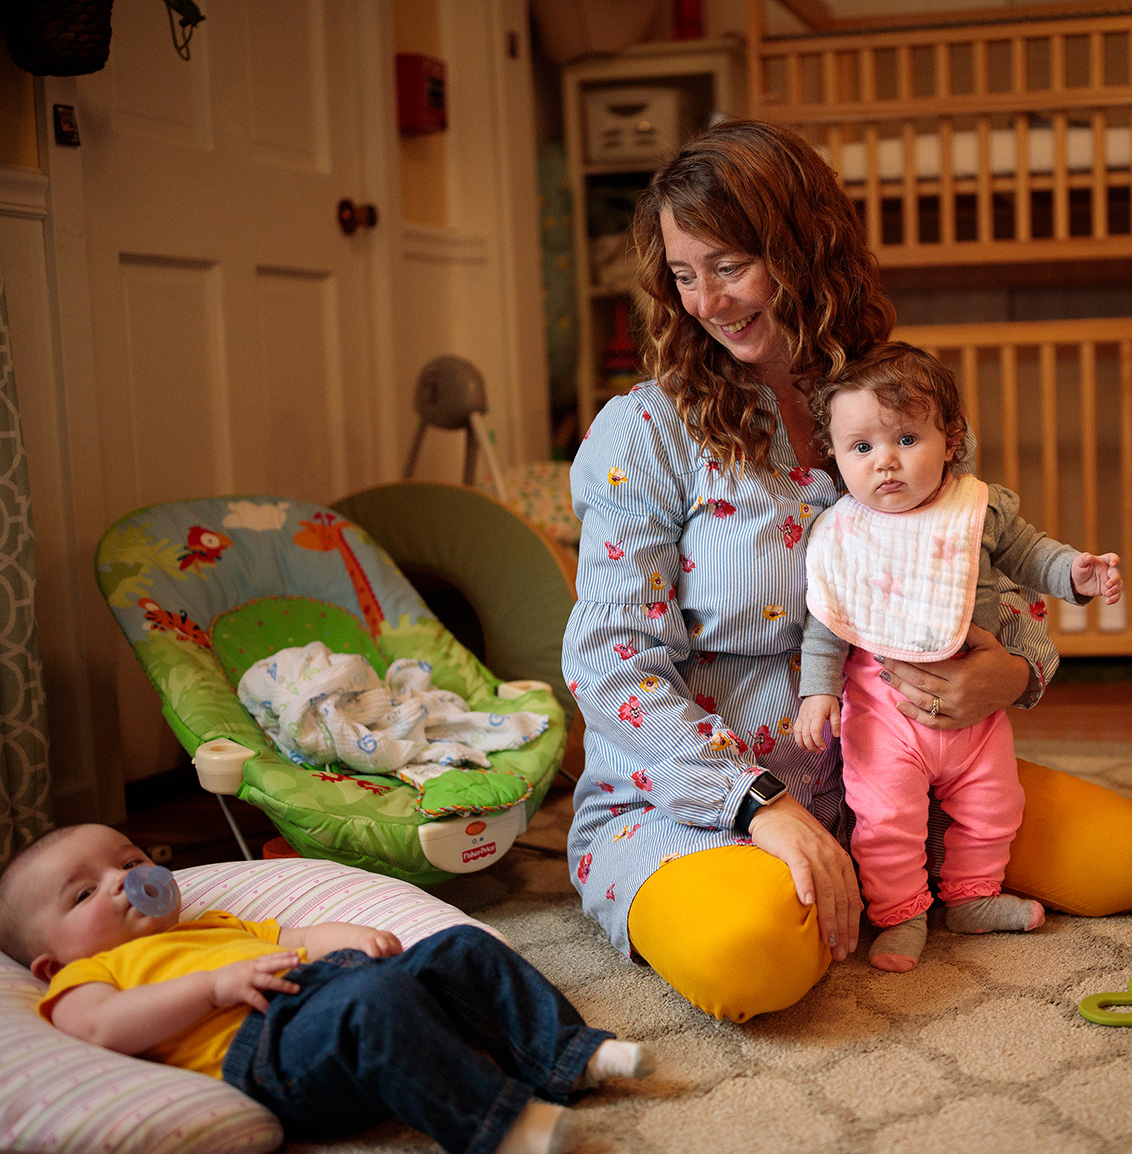 A woman sits on the floor in front of a row of cribs with two small children.